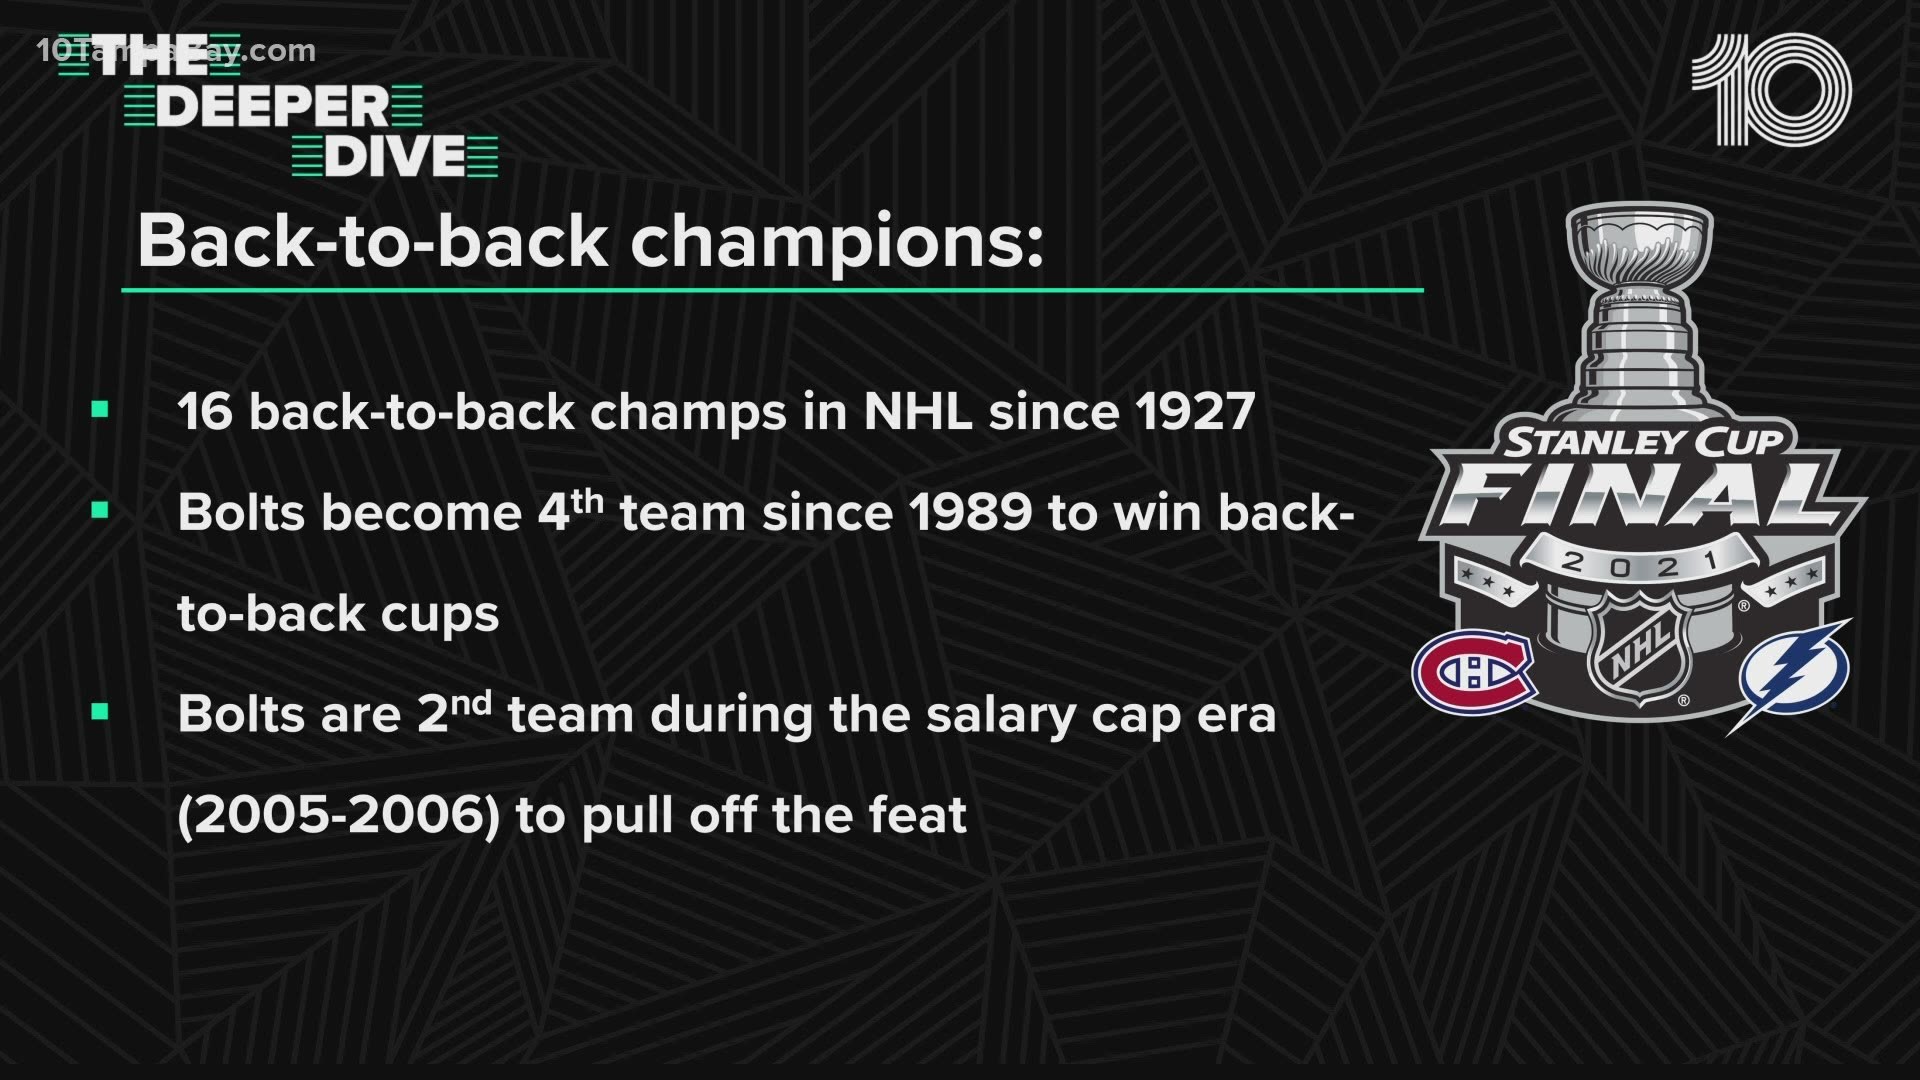 There have been 16 back-to-back champs, including the Bolts, since 1927.